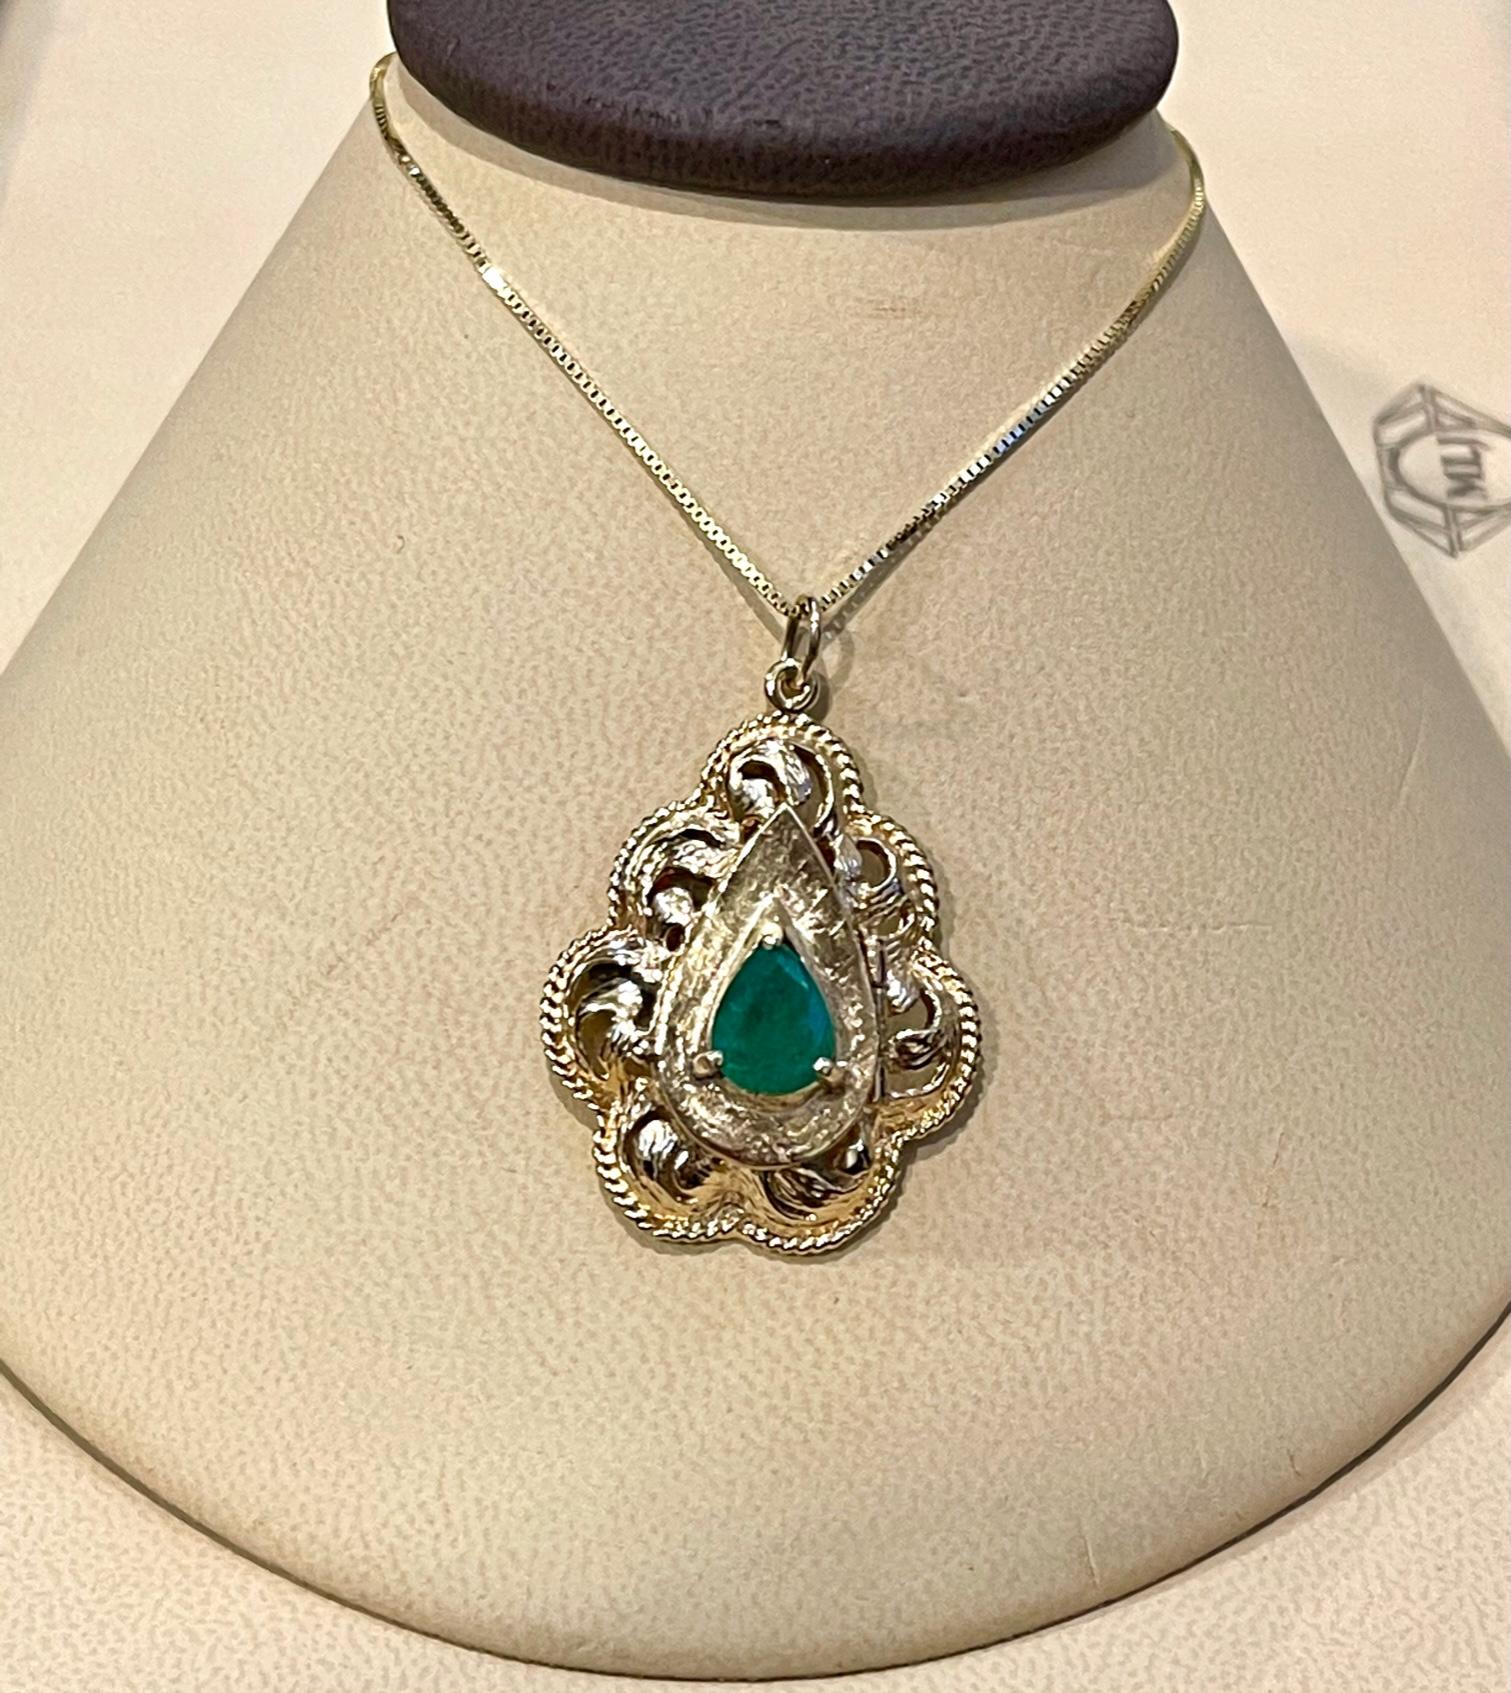 Vintage 14 Karat Yellow Gold 10.5 Gm Chain with Locket and Natural Emerald For Sale 5